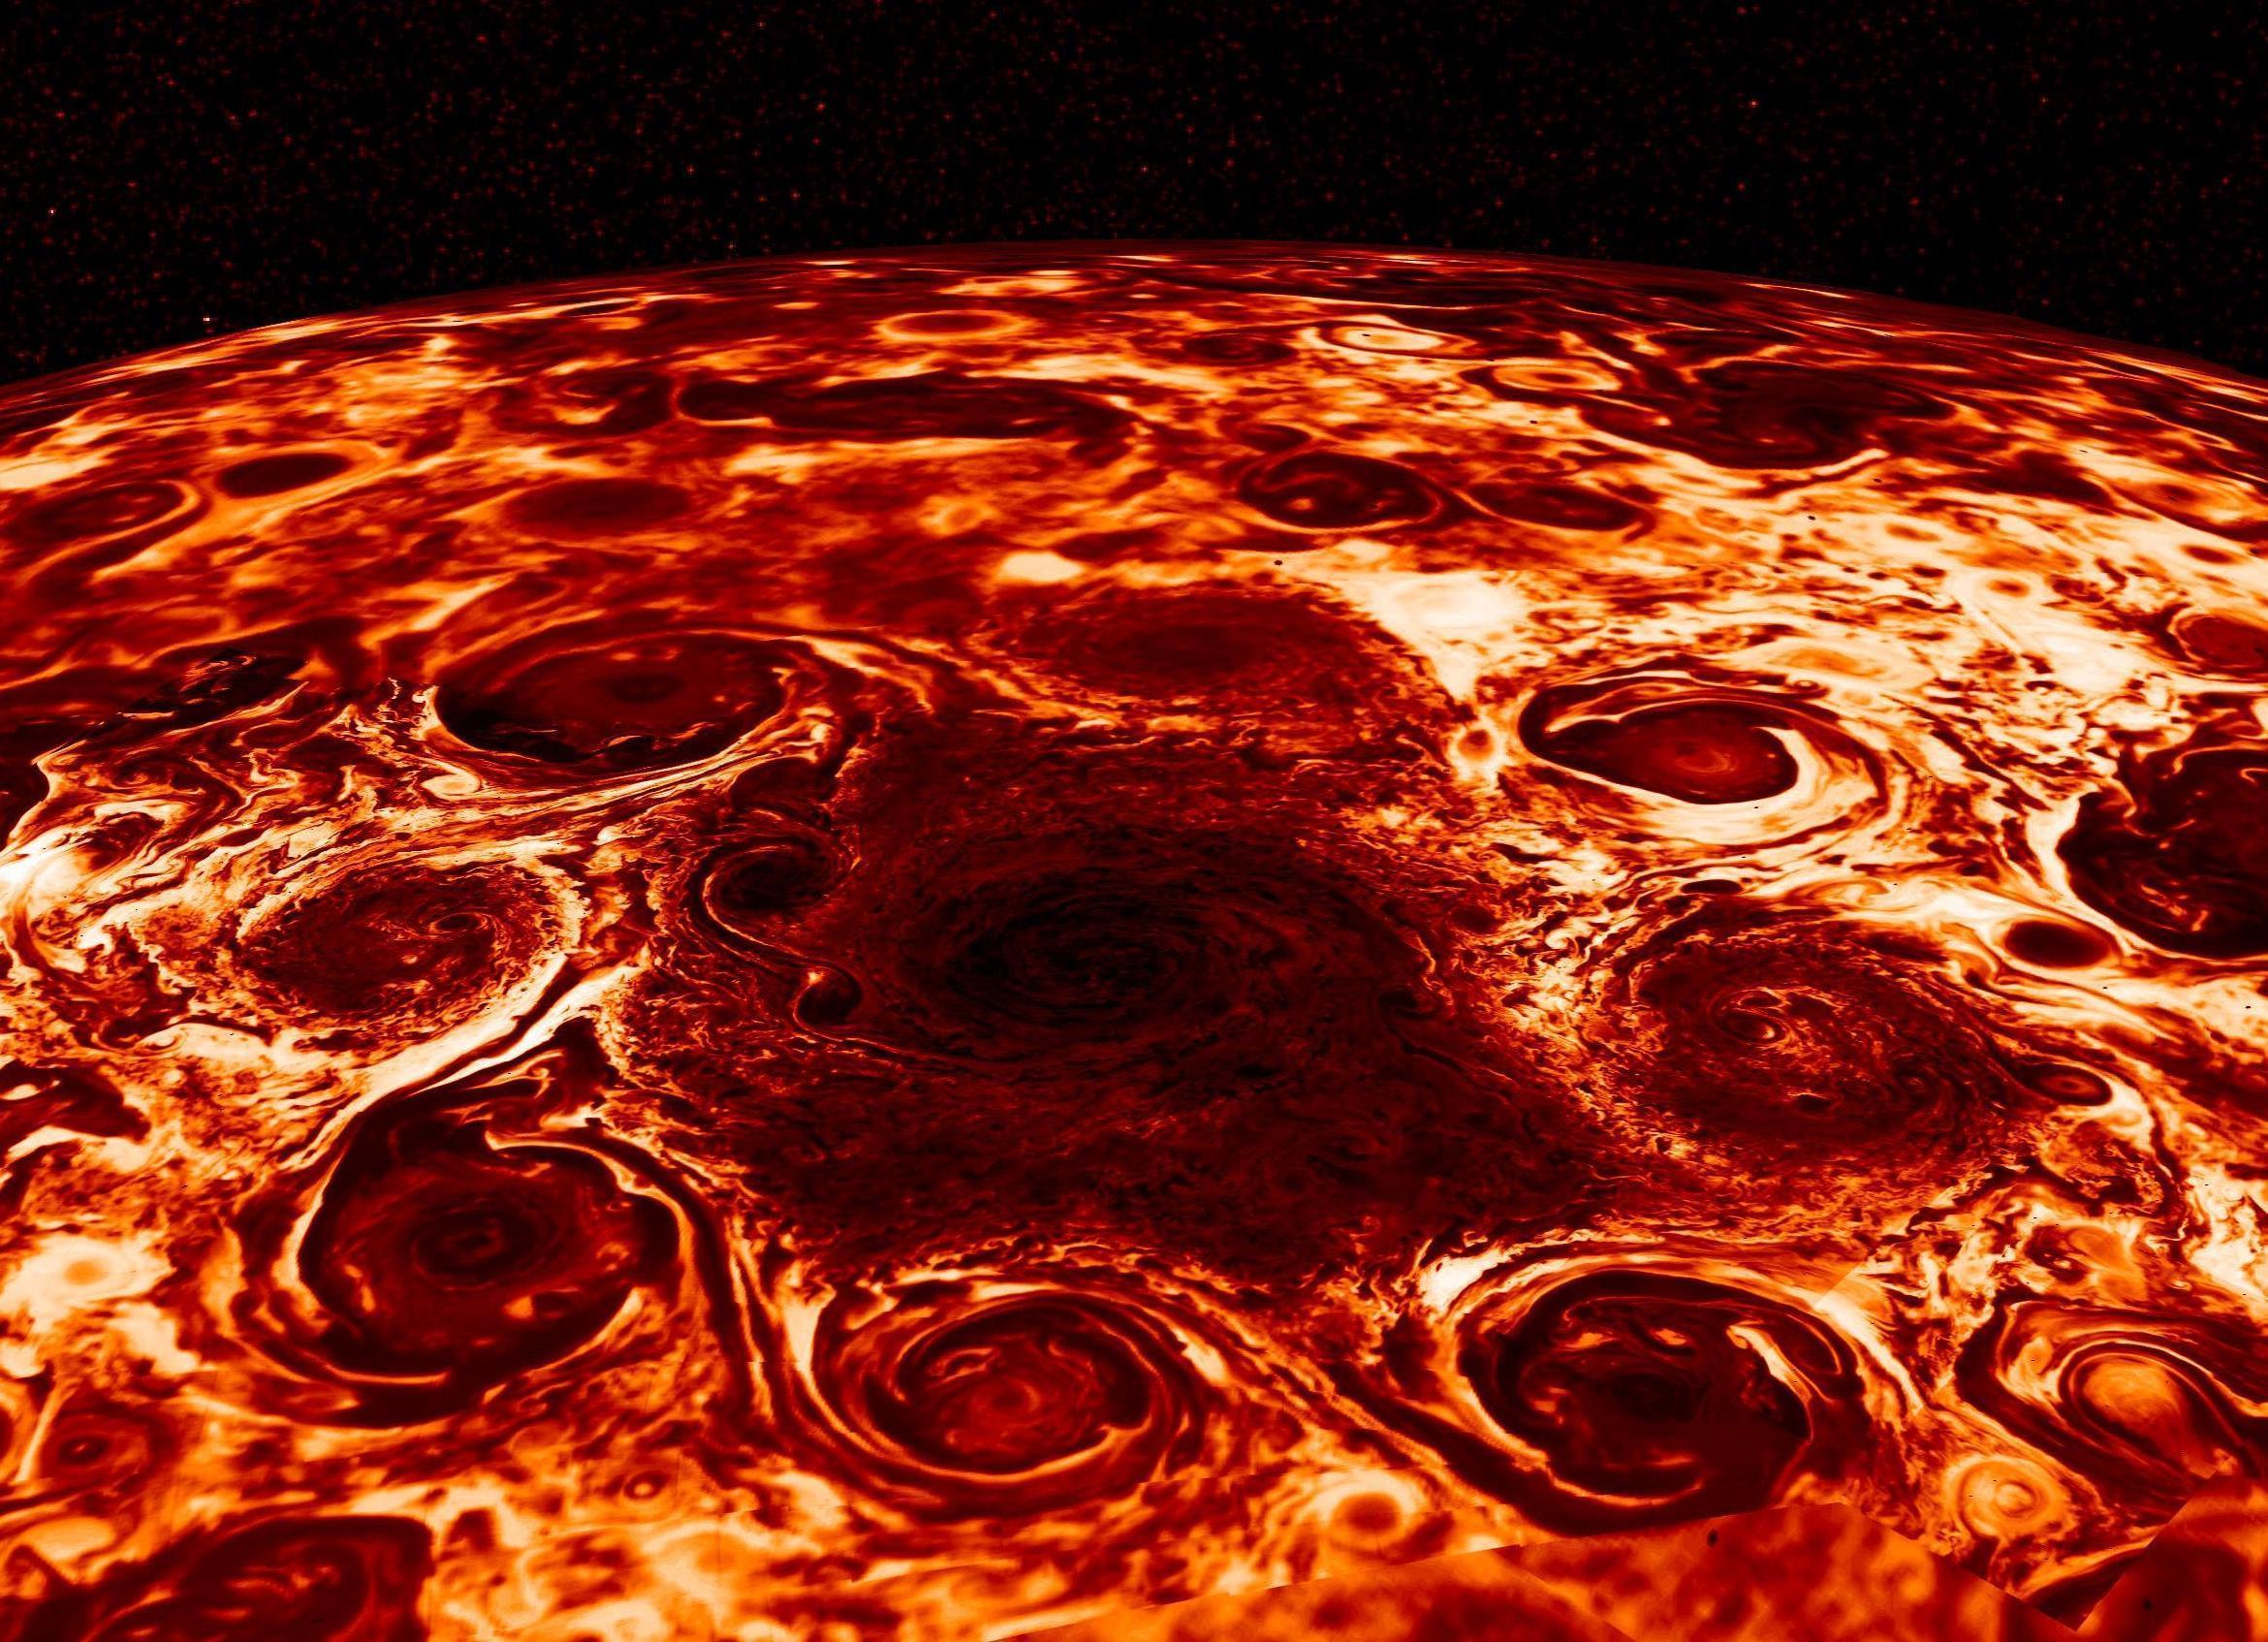 In this composite image, derived from data collected by the Jovian Infrared Auroral Mapper (JIRAM) instrument aboard NASA's Juno mission to Jupiter, shows the central cyclone at the planet's north pole and the eight cyclones that encircle it